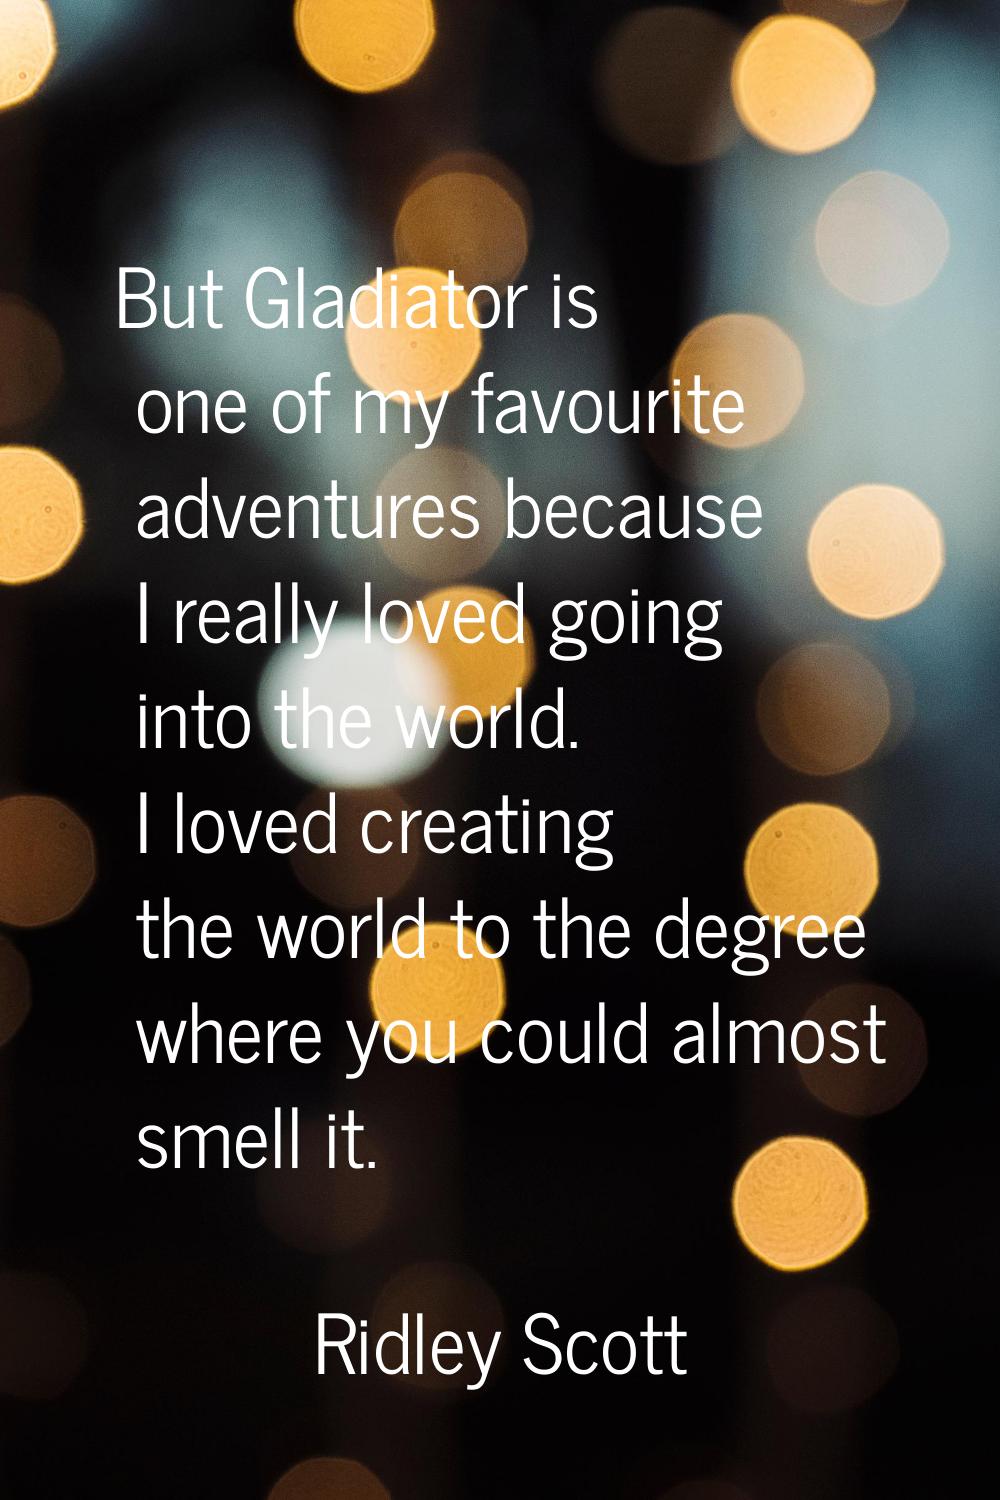 But Gladiator is one of my favourite adventures because I really loved going into the world. I love